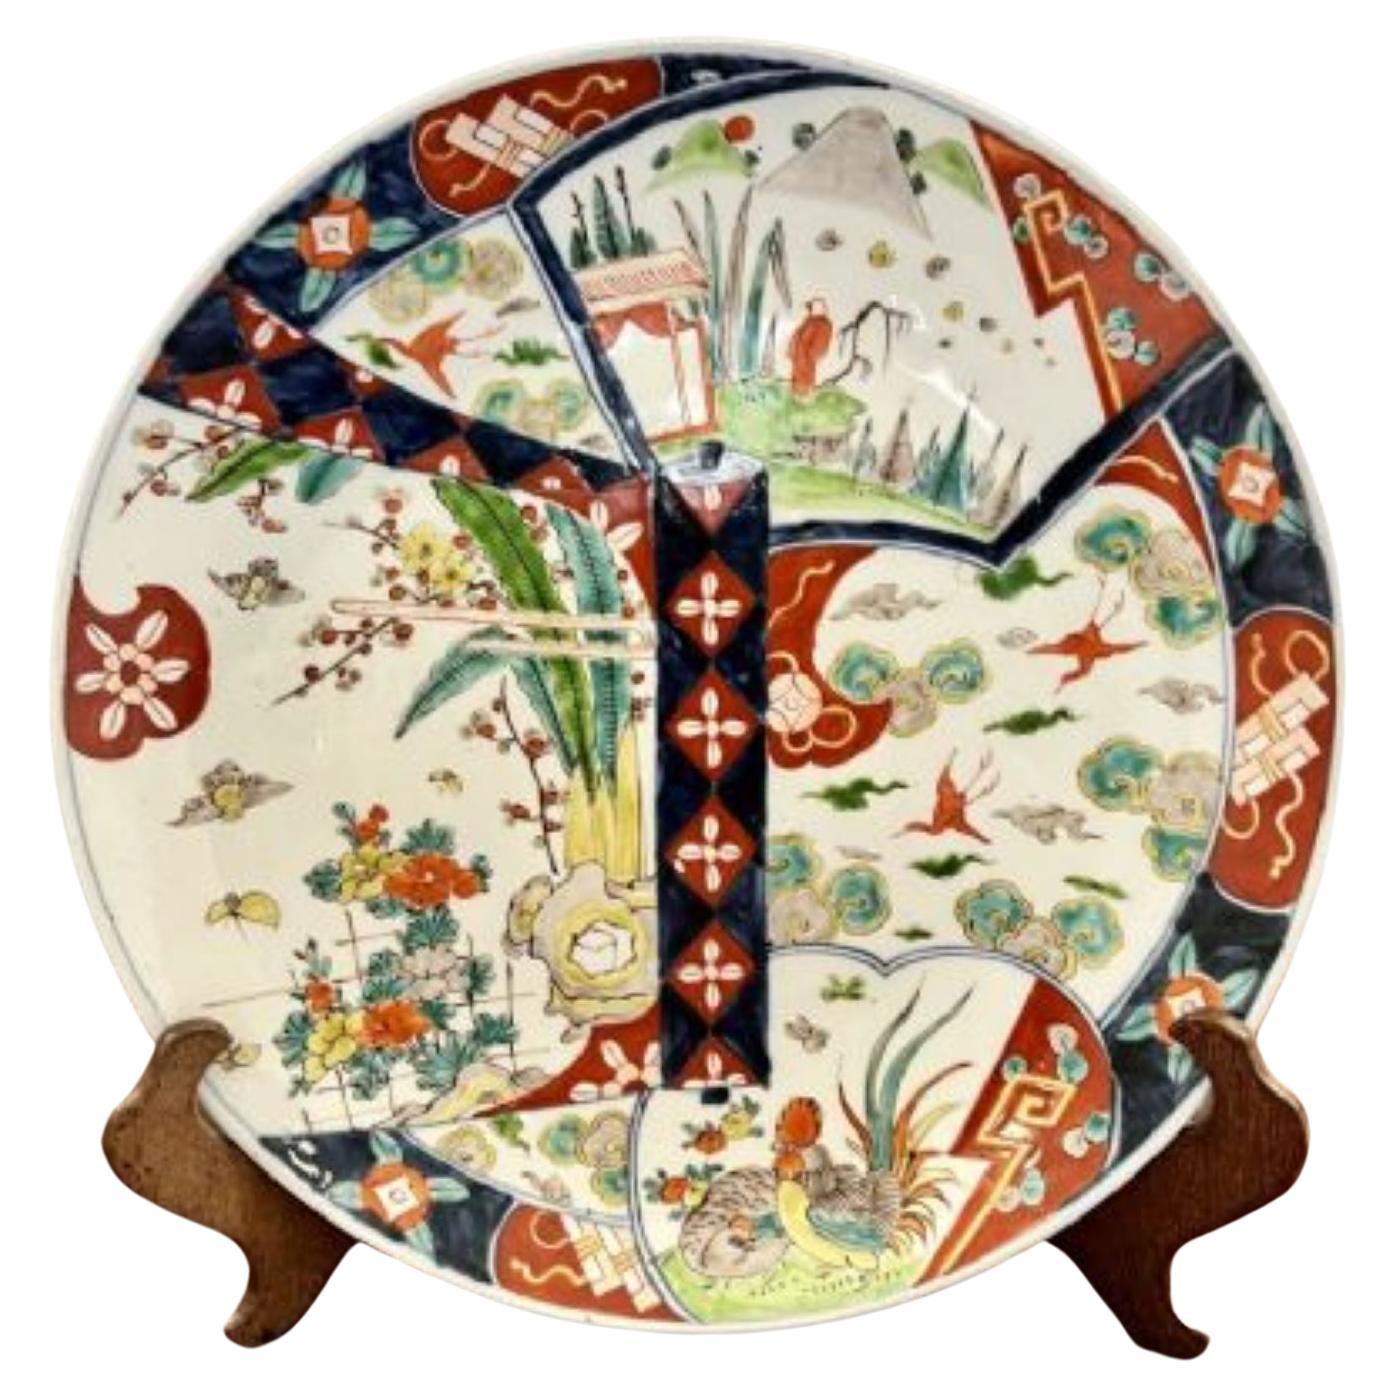 Quality antique  Japanese Imari plate  For Sale